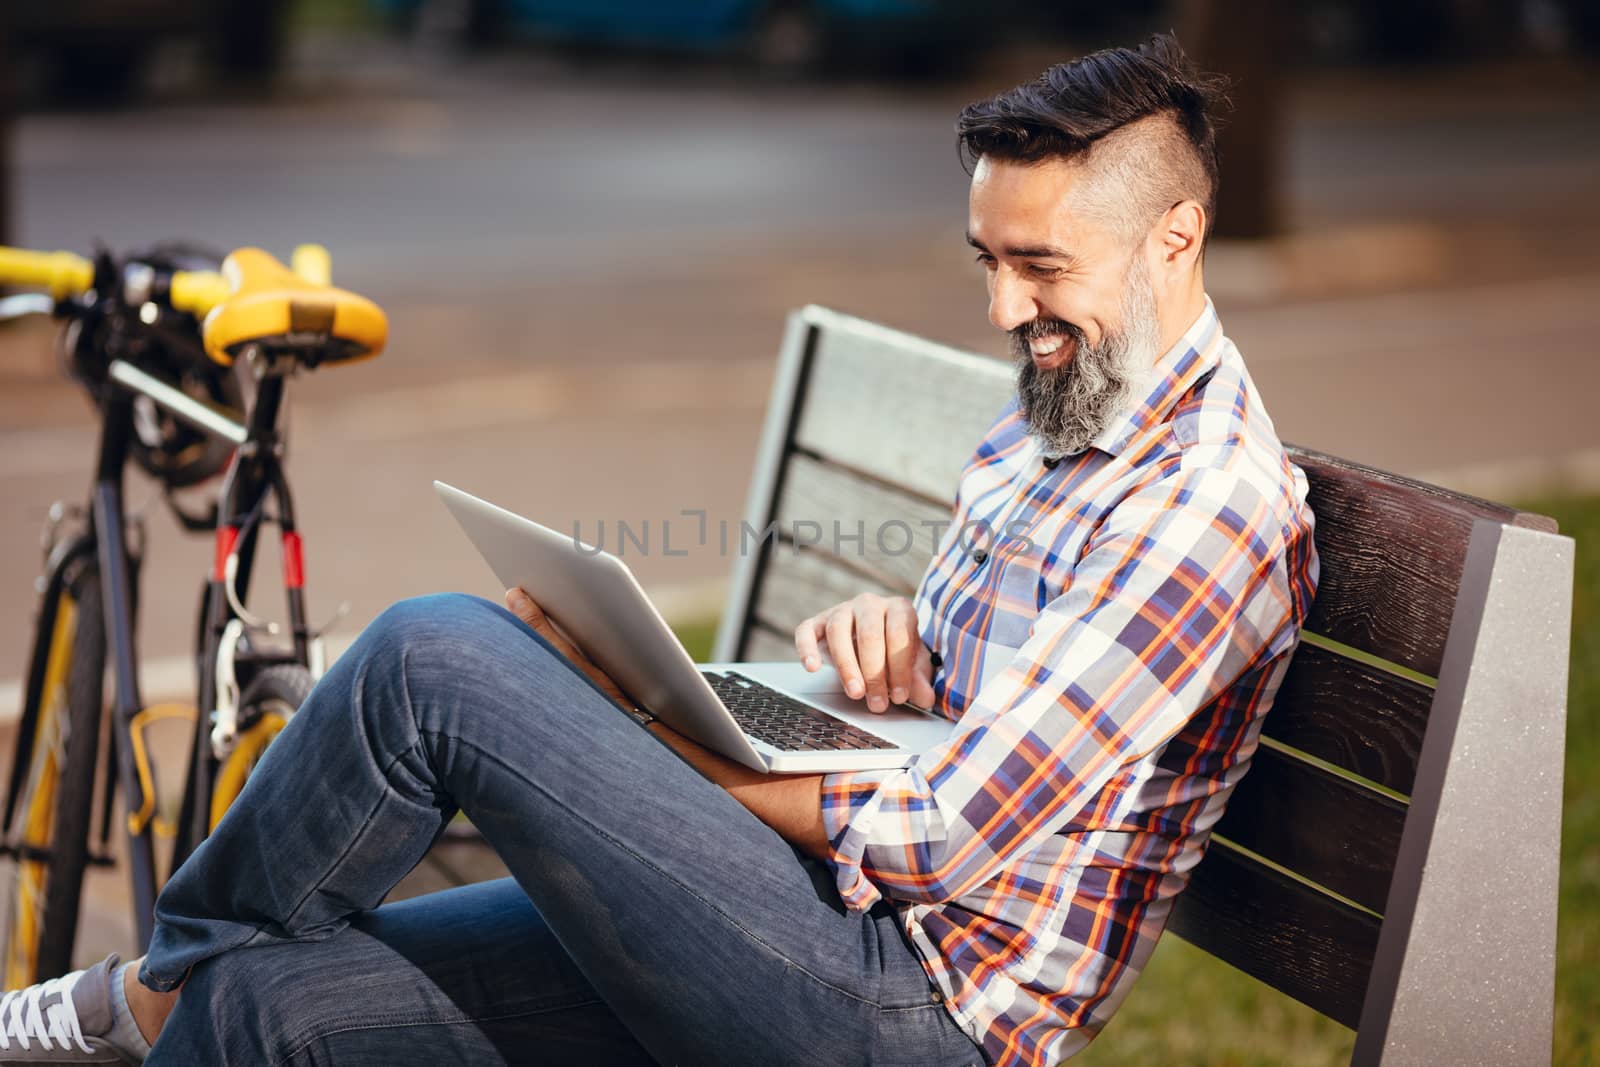 Smiling casual businessman on a break. He is sitting on a bench and working at laptop, next the bench rests a bike.